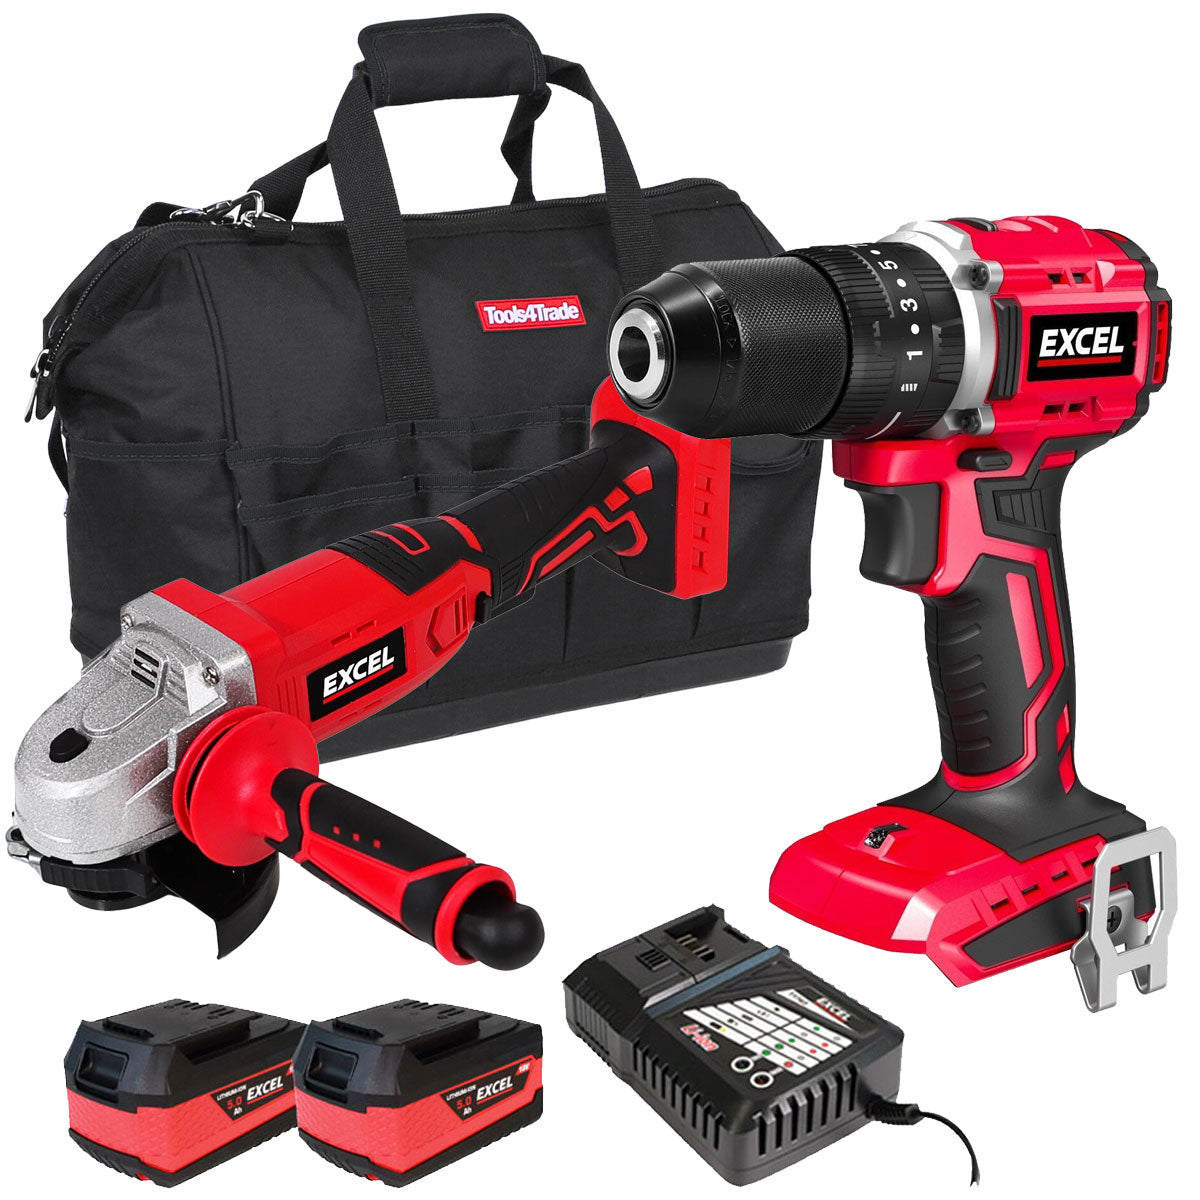 Excel 18V Cordless 2 Piece Tool Kit with 2 x 5.0Ah Batteries & Charger in Bag EXL5071